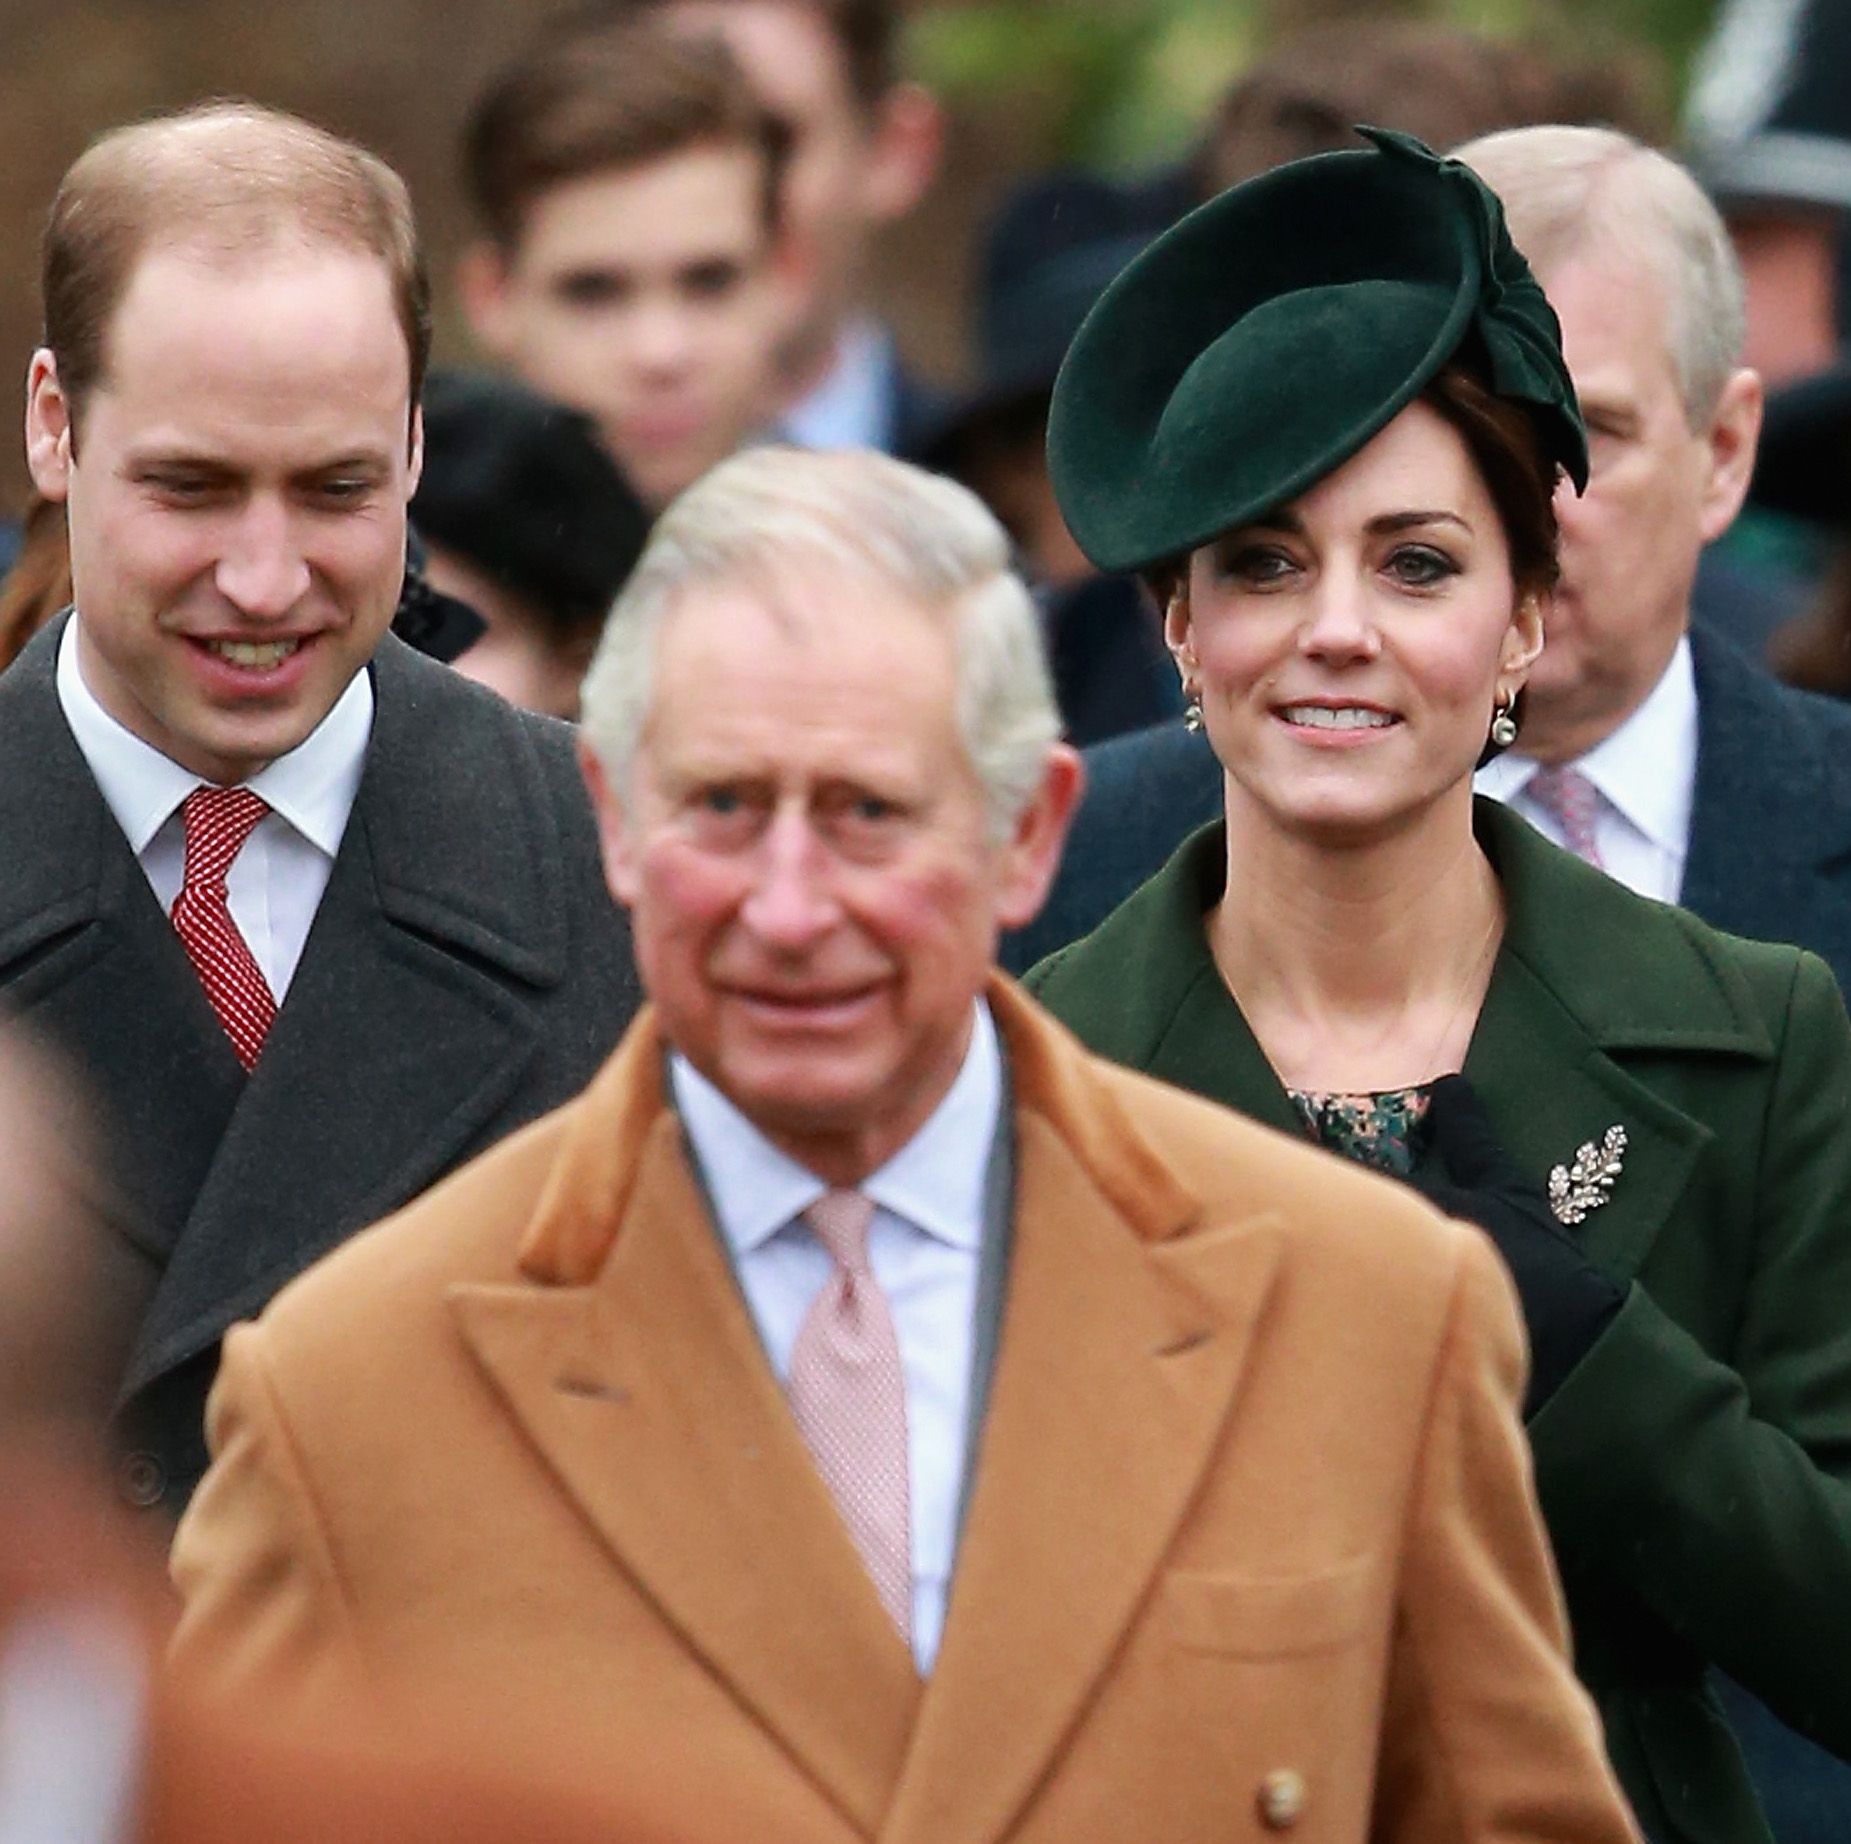 King Charles Has Made Some Major Changes to the Royal Family's Christmas Plans